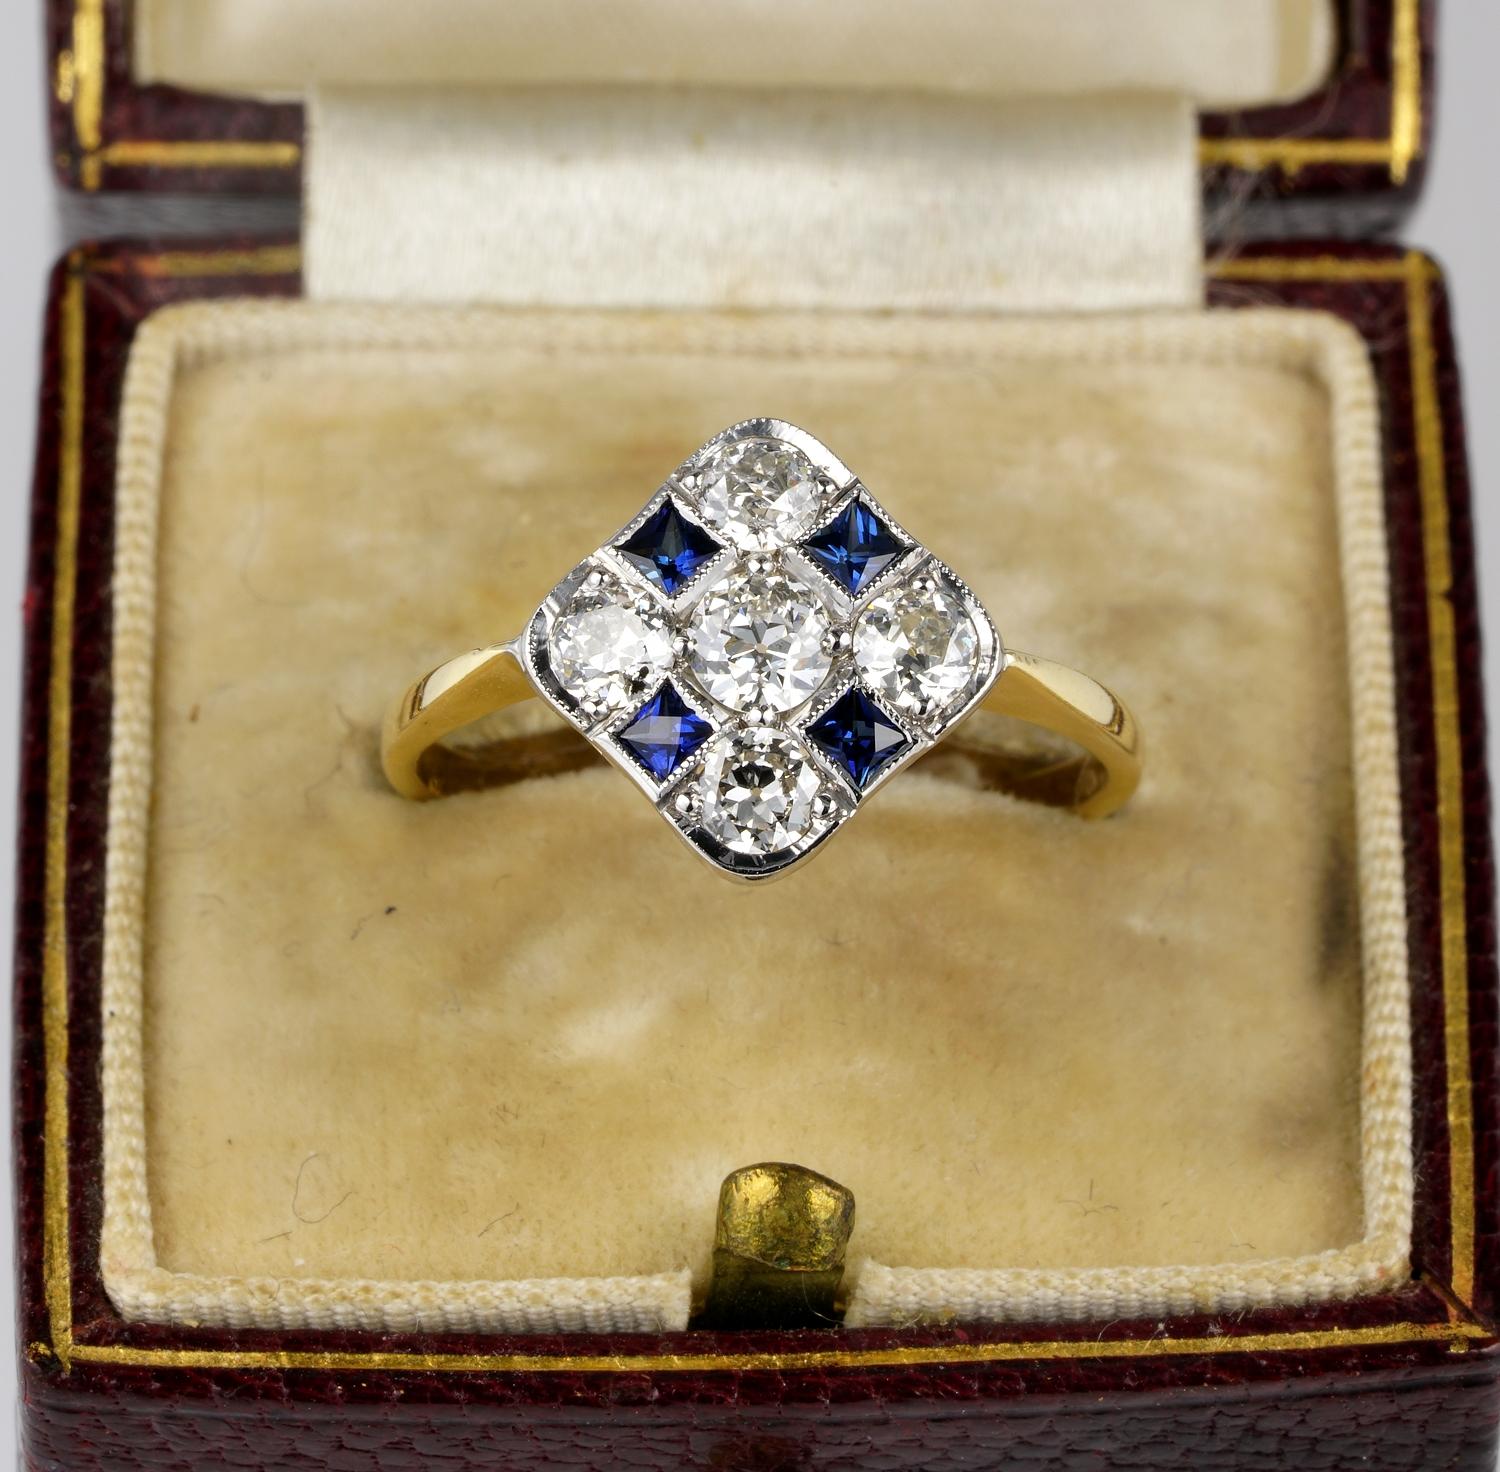 This charming antique ring is Edwardian period
Individually hand crafted of solid 18 Kt gold topped by Platinum, marked
Designed to be elegant and timeless, with a flat head enriched with dazzling Diamonds alternated by a strong Royal Blue Sapphires